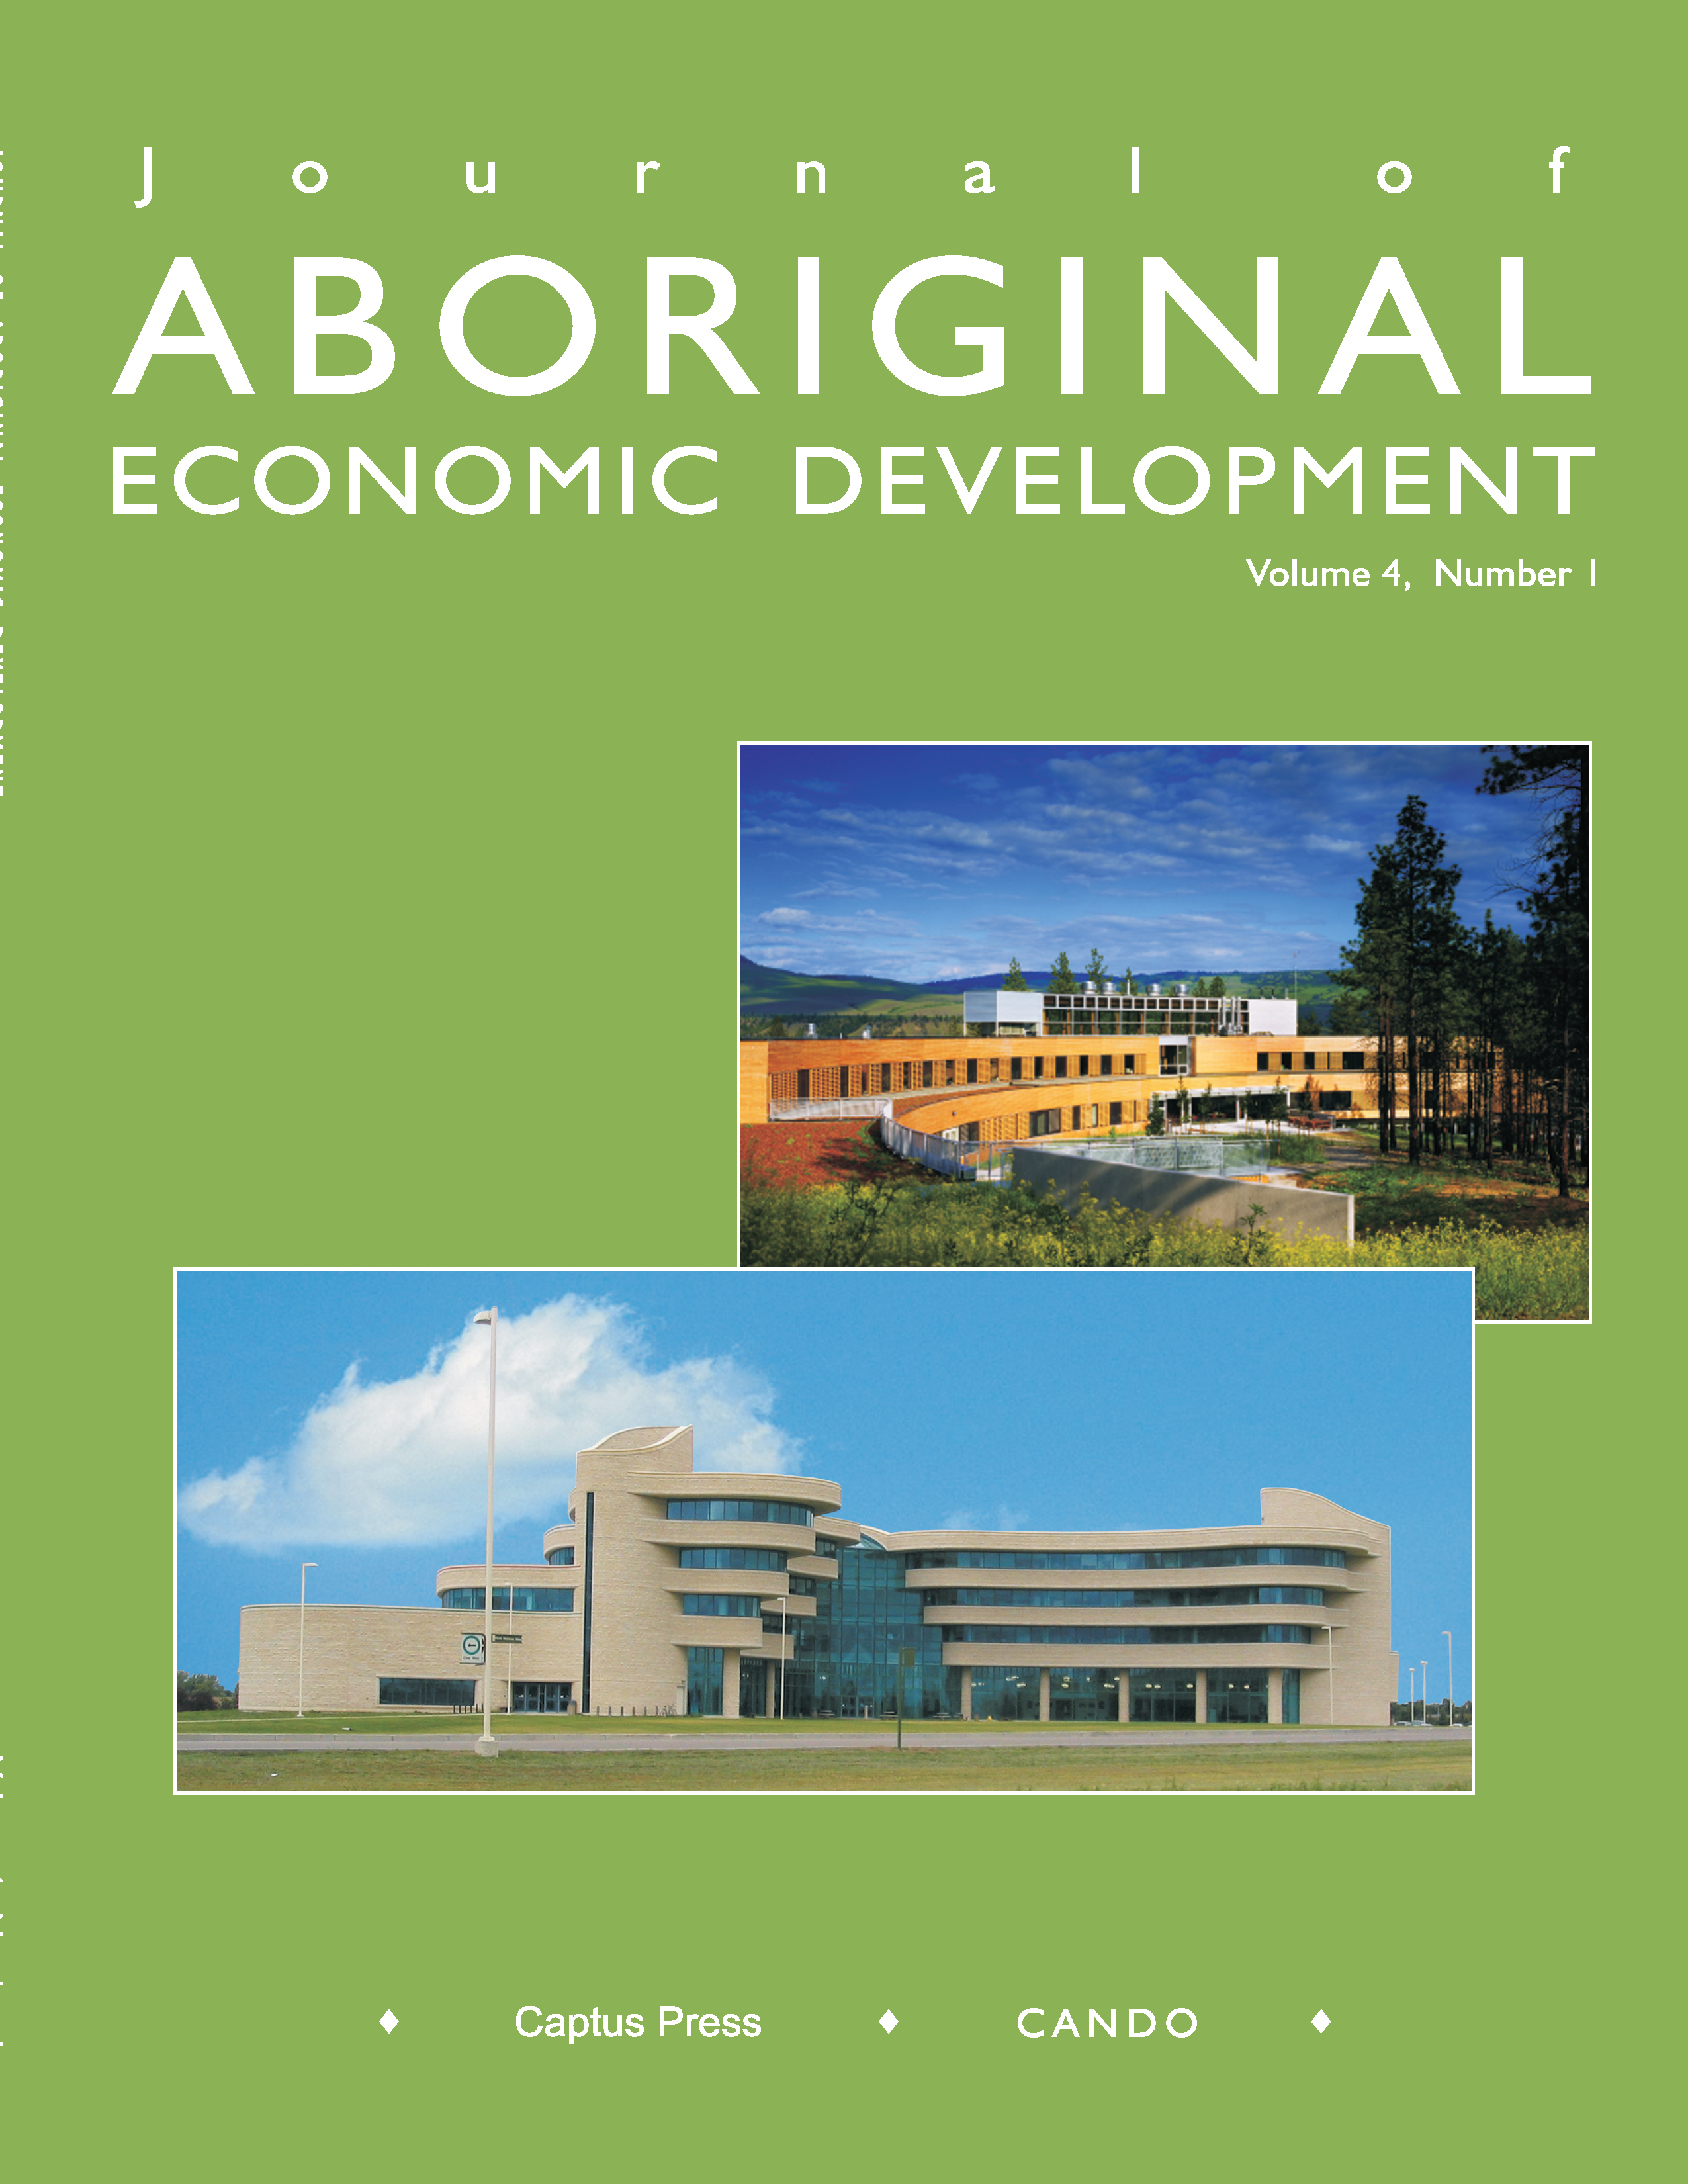 Cover image depicting the Nicola Valley Institute of Technology and the First Nations University of Canada